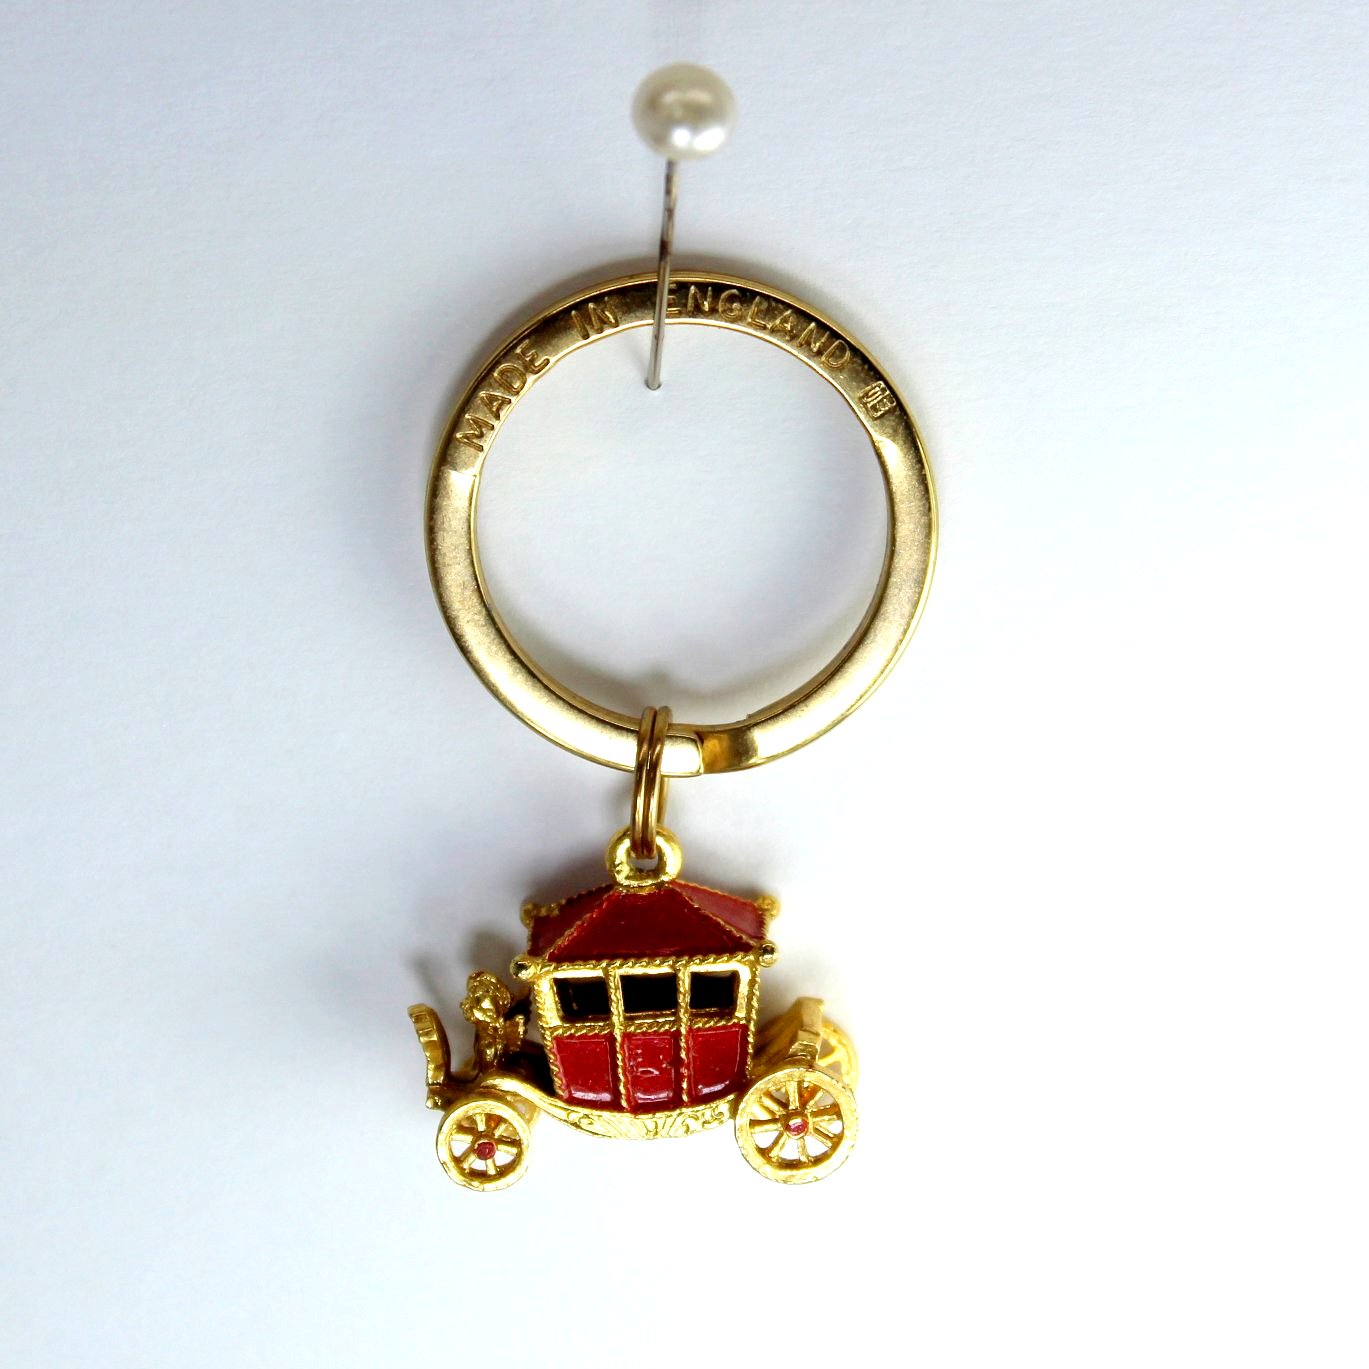 Keychain Key Ring Queen's Carriage Made England Heavy Vintage Unused long view ring